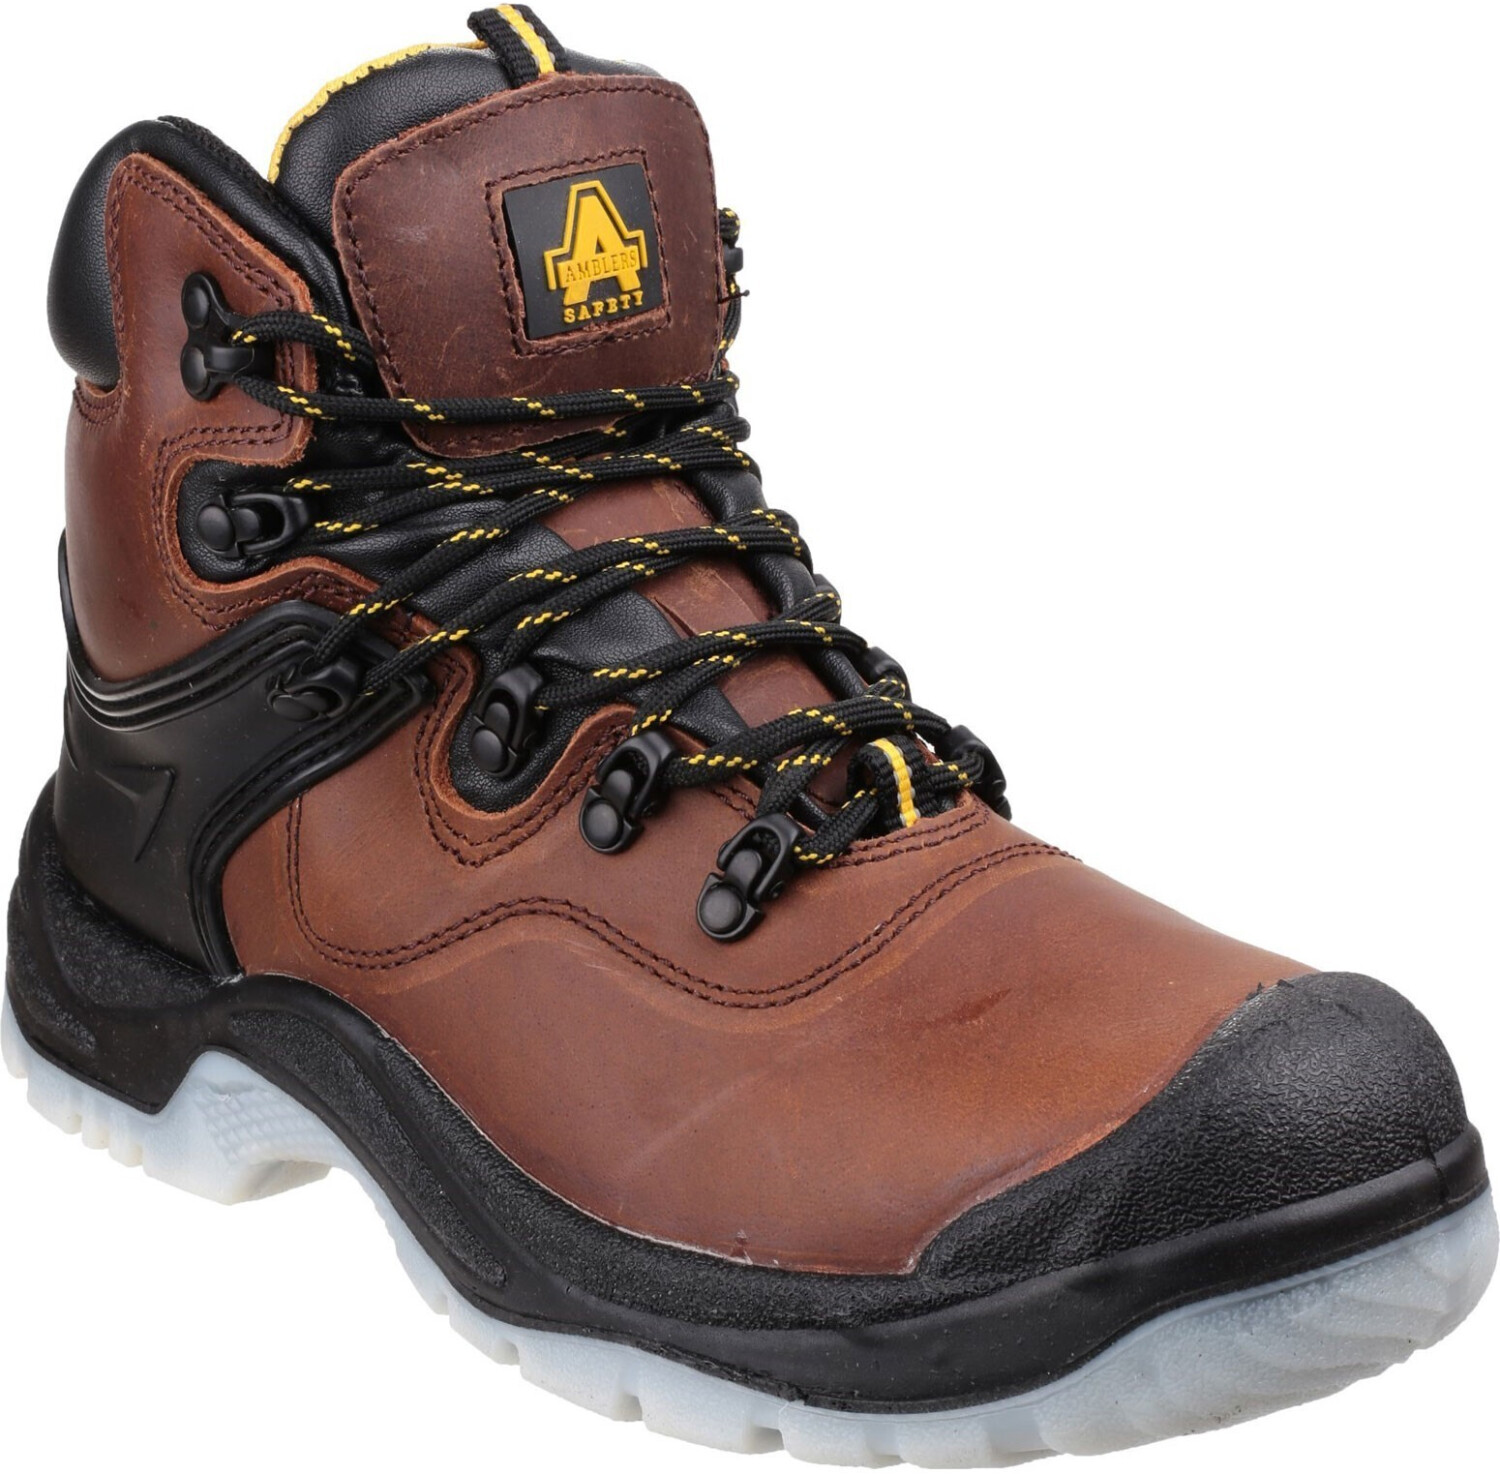 Amblers Mens Safety FS197 Shock Absorbing Waterproof Safety Boots Brown